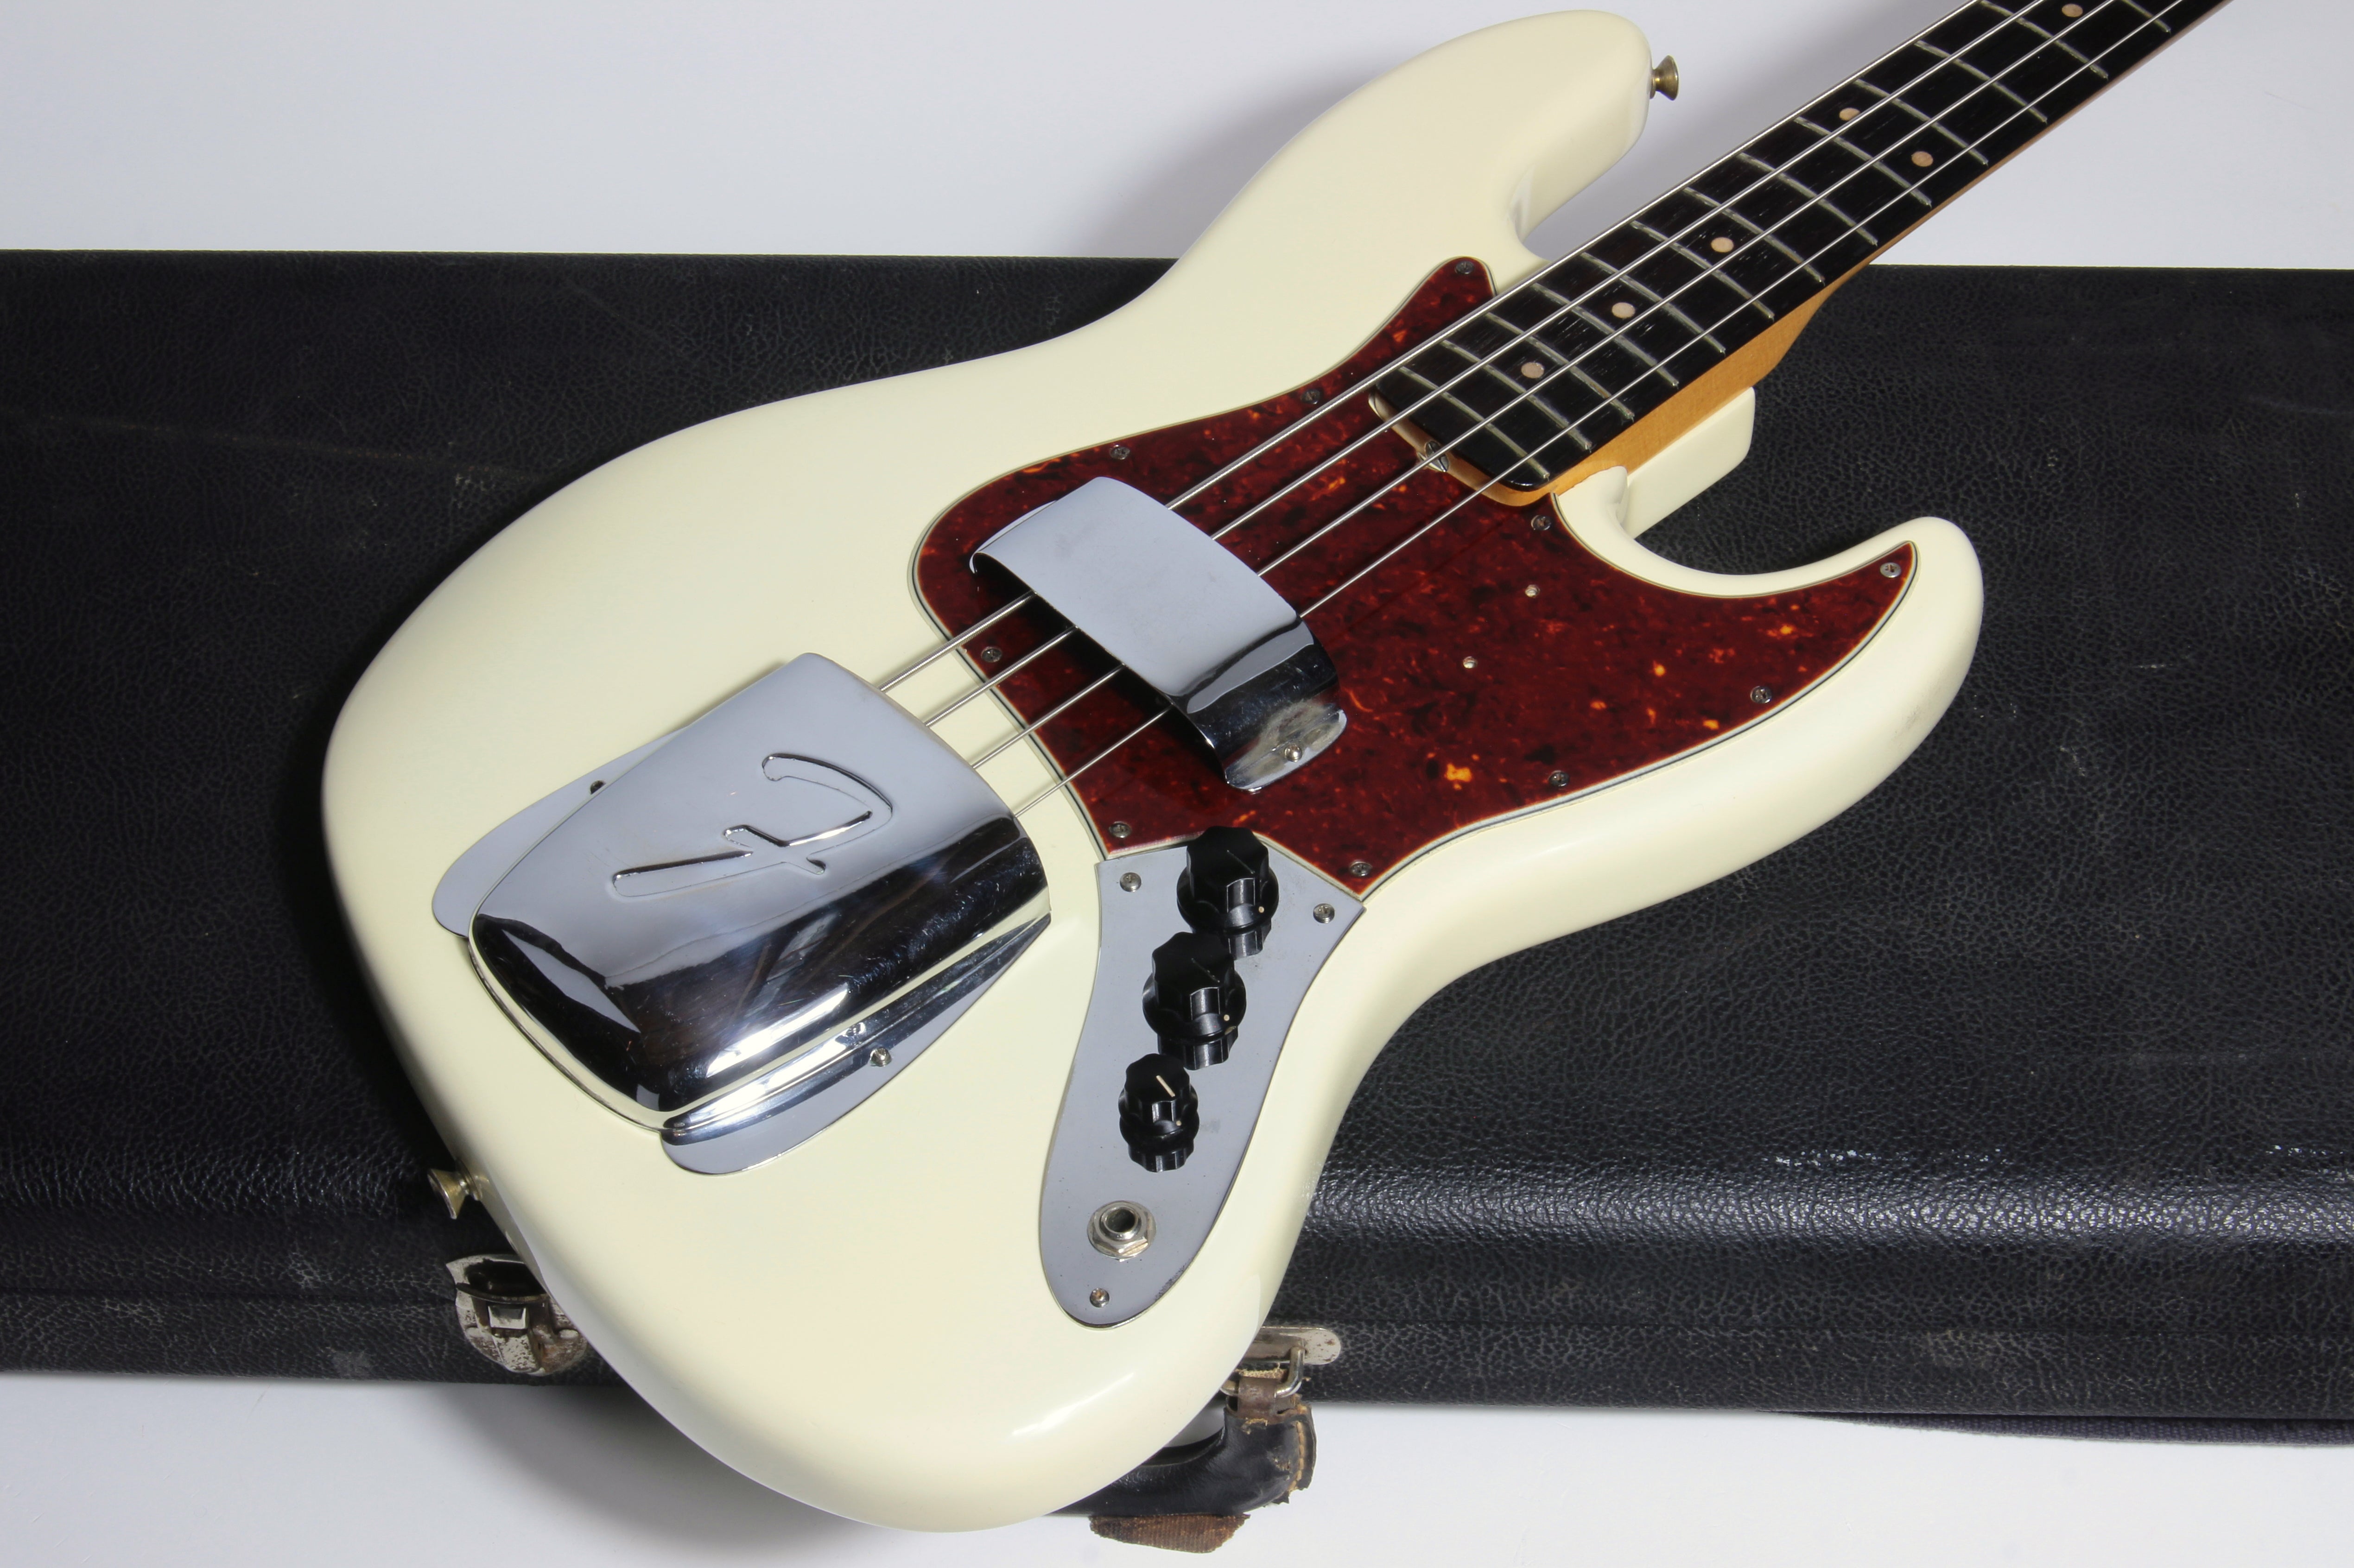 1964 Fender Jazz Bass Olympic White - Matching Headstock, Pre-CBS, Clay Dots, Vintage L-Series, Original Case